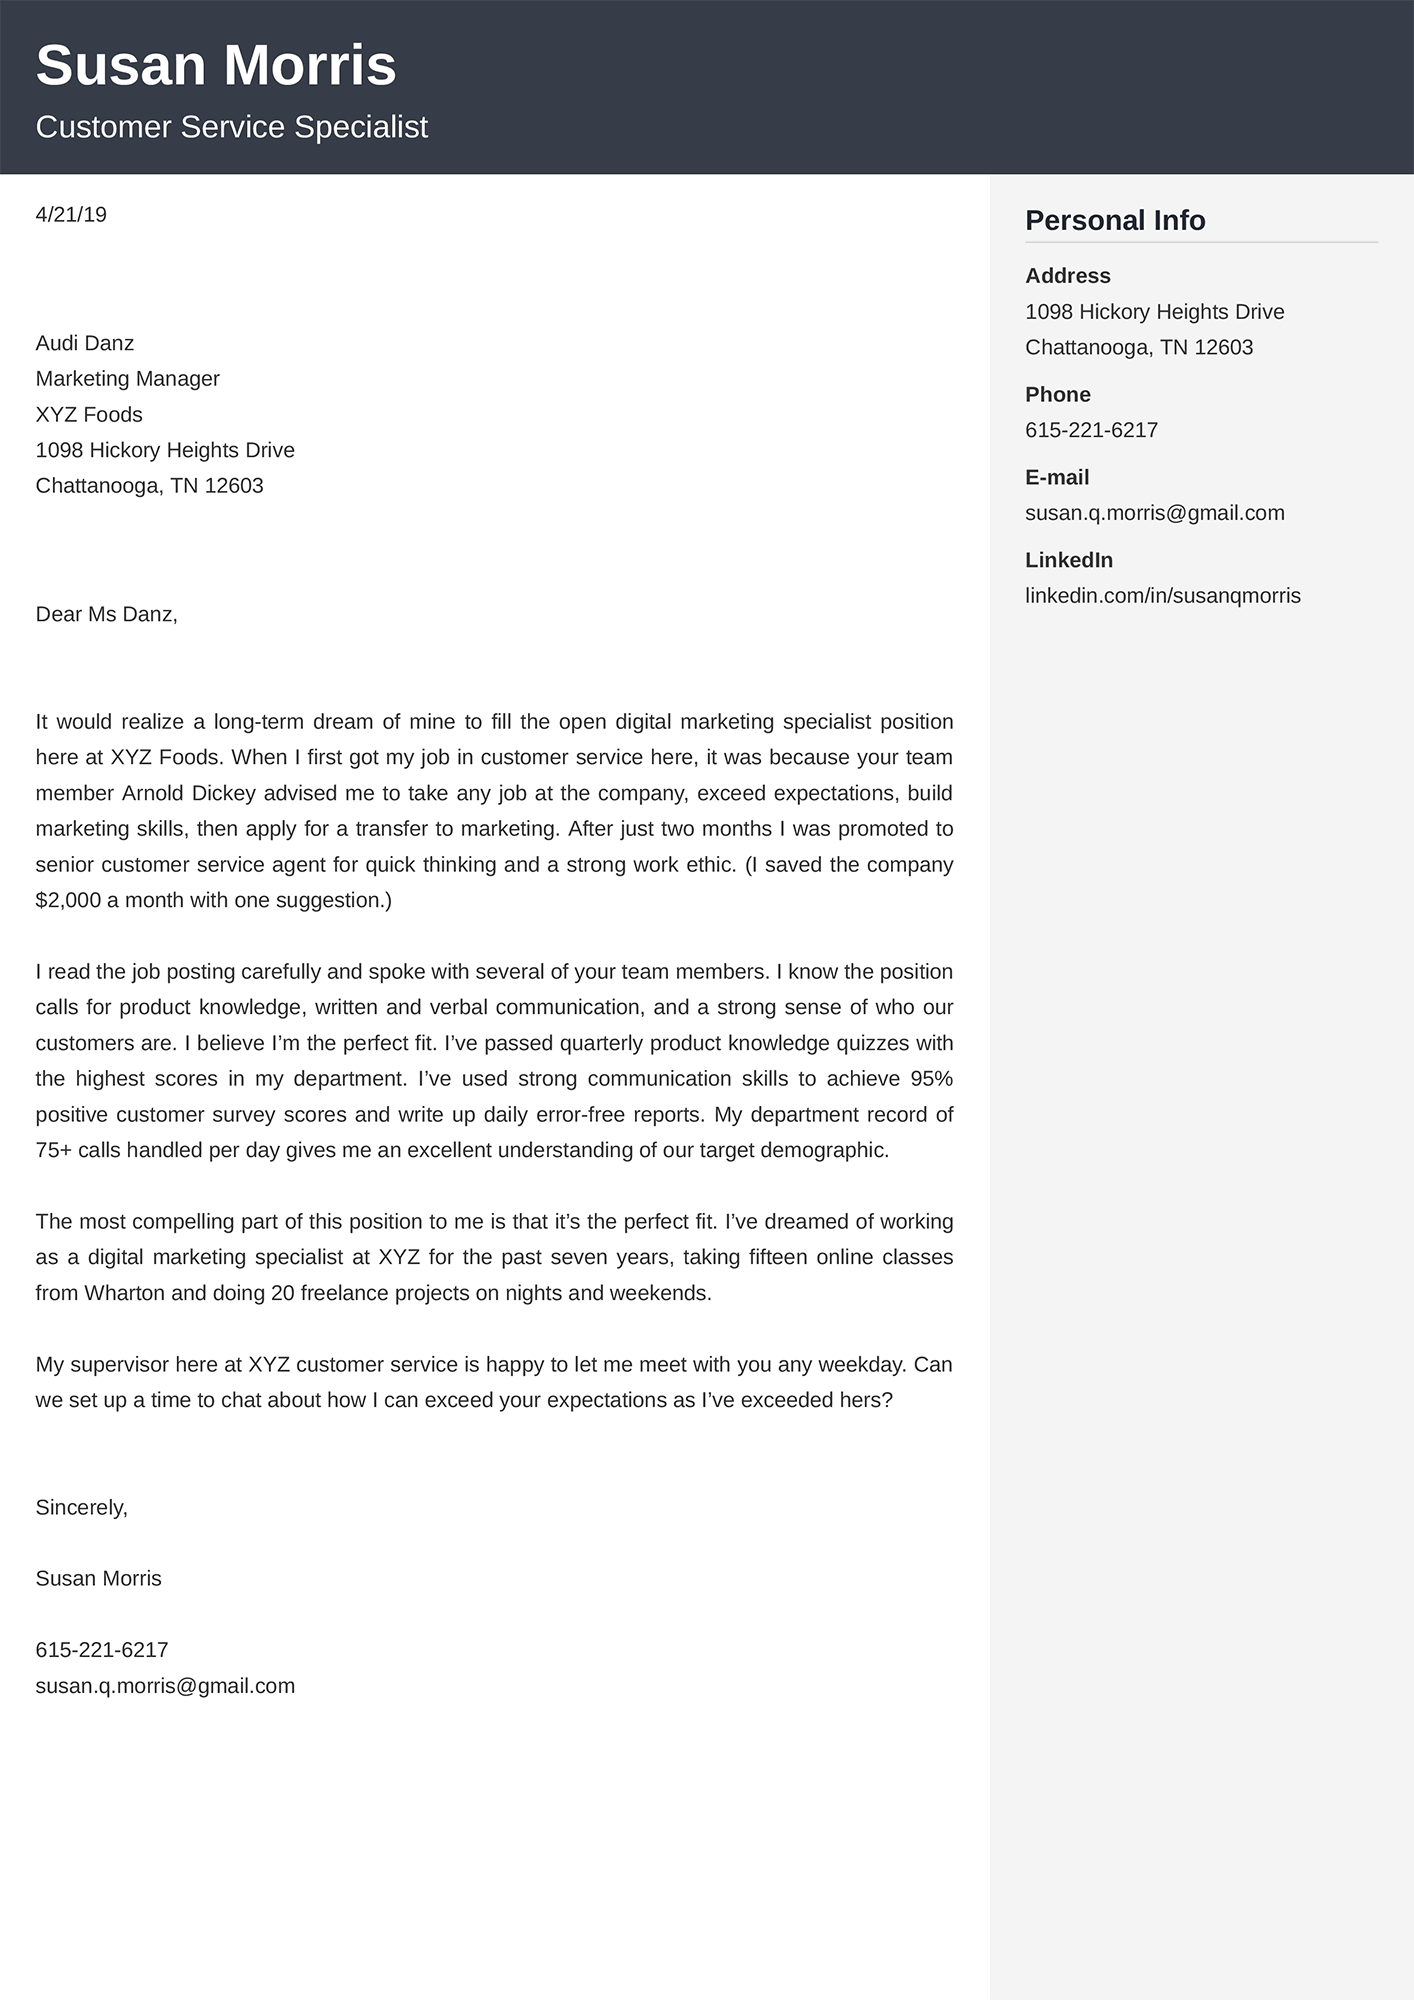 Opening Cover Letter Statements from cdn-images.zety.com